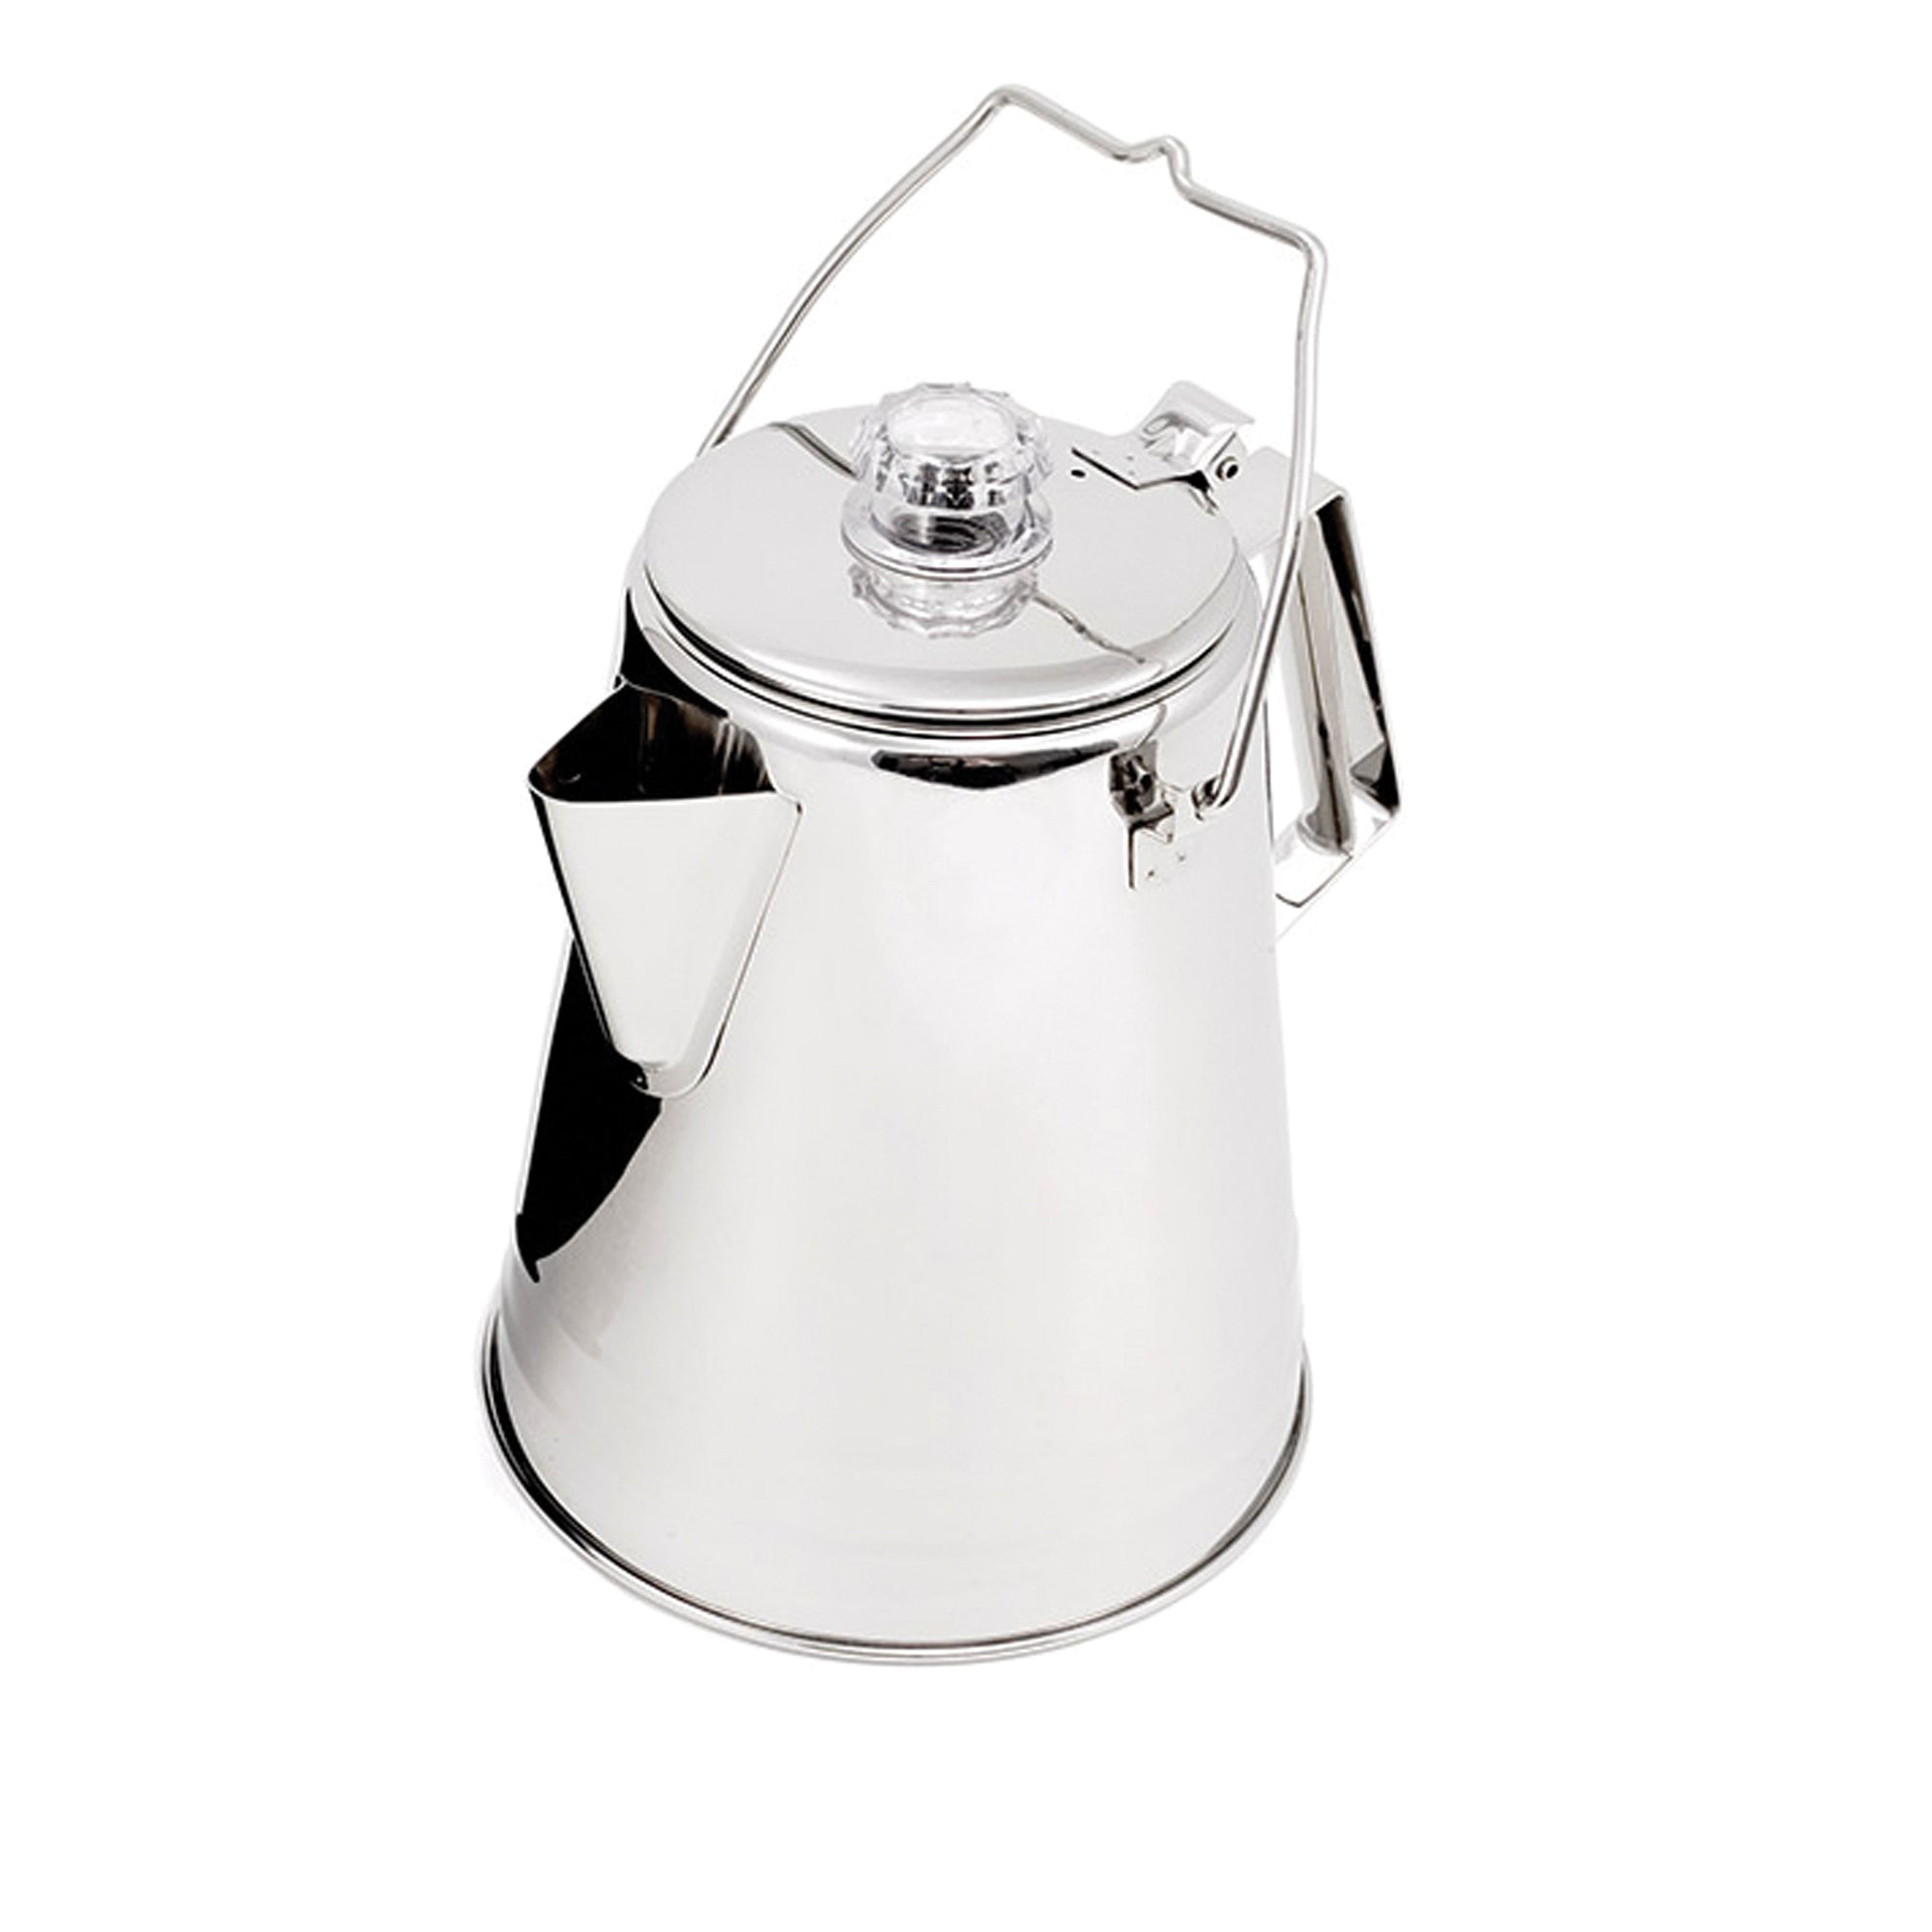 GSI Outdoors Glacier Stainless Steel Conical Percolator - 8 cup